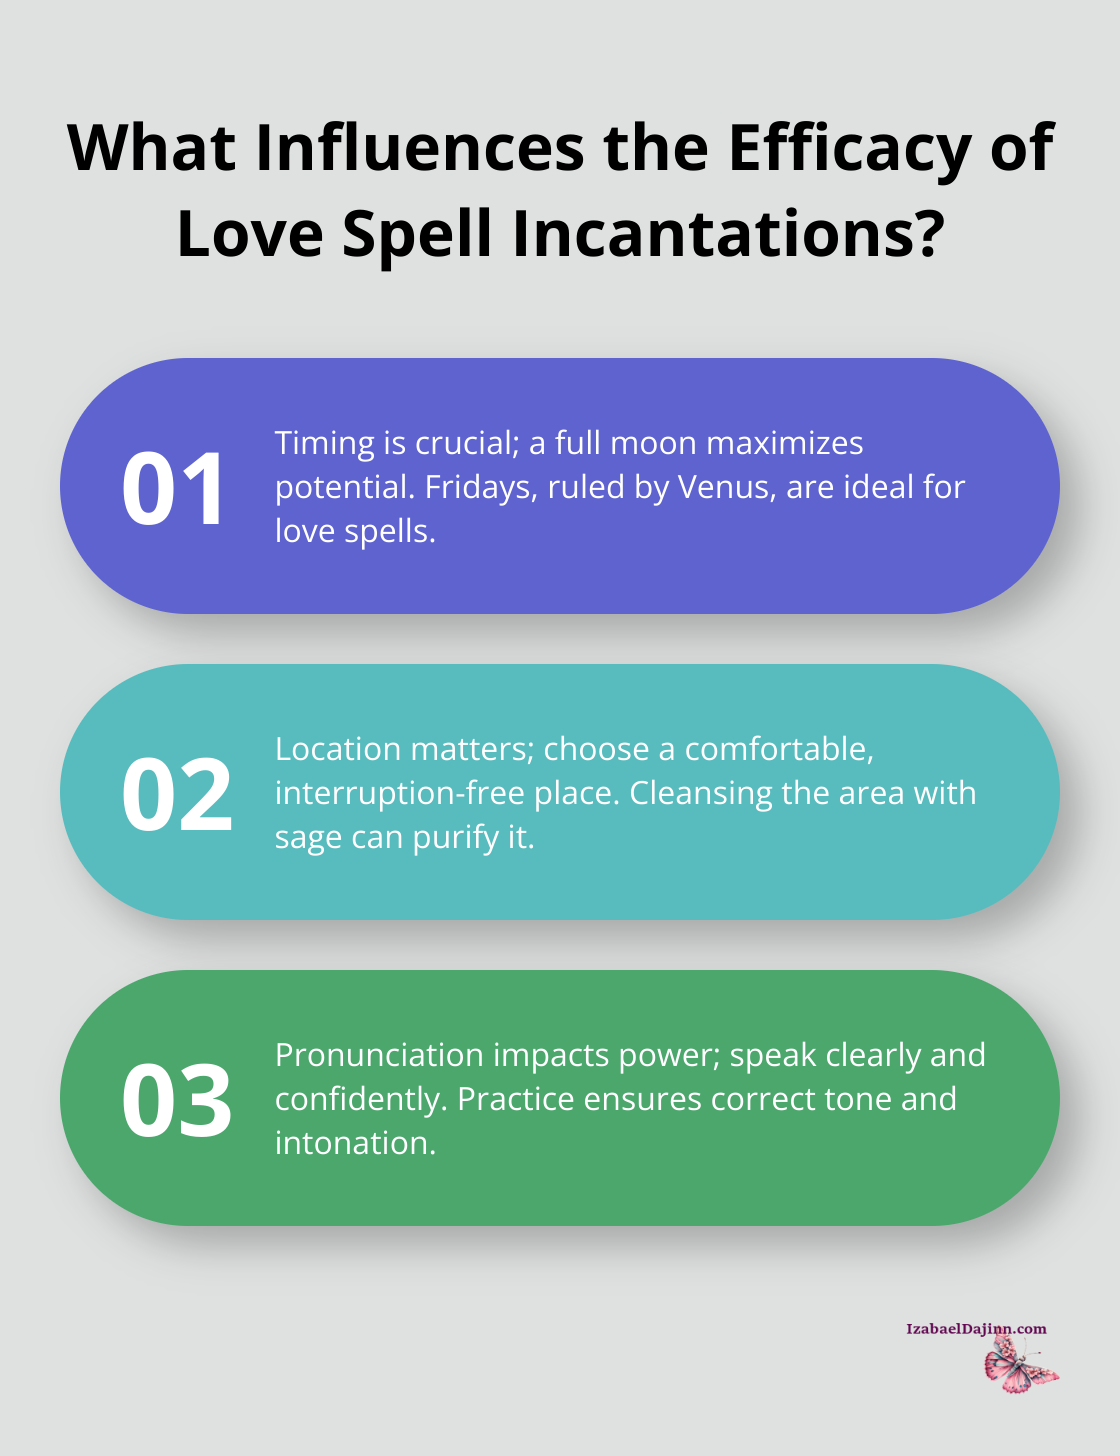 Fact - What Influences the Efficacy of Love Spell Incantations?